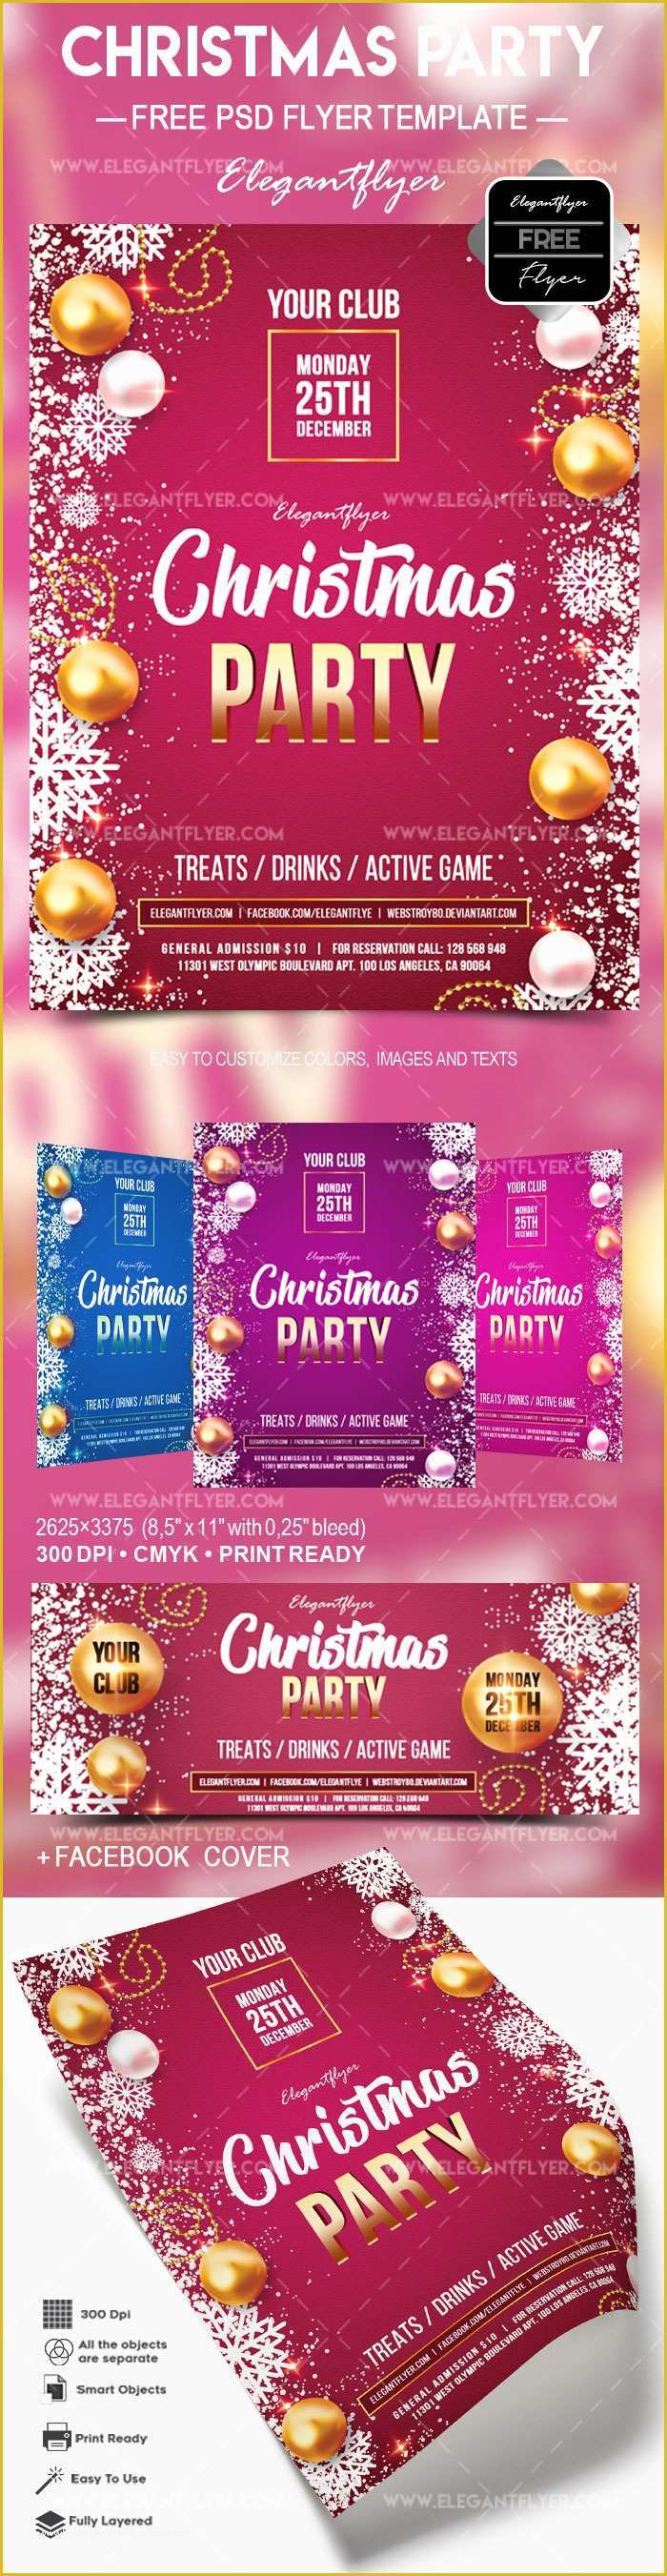 Free Christmas Flyer Templates Psd Of Free Christmas Party – Flyer Psd Template – by Elegantflyer